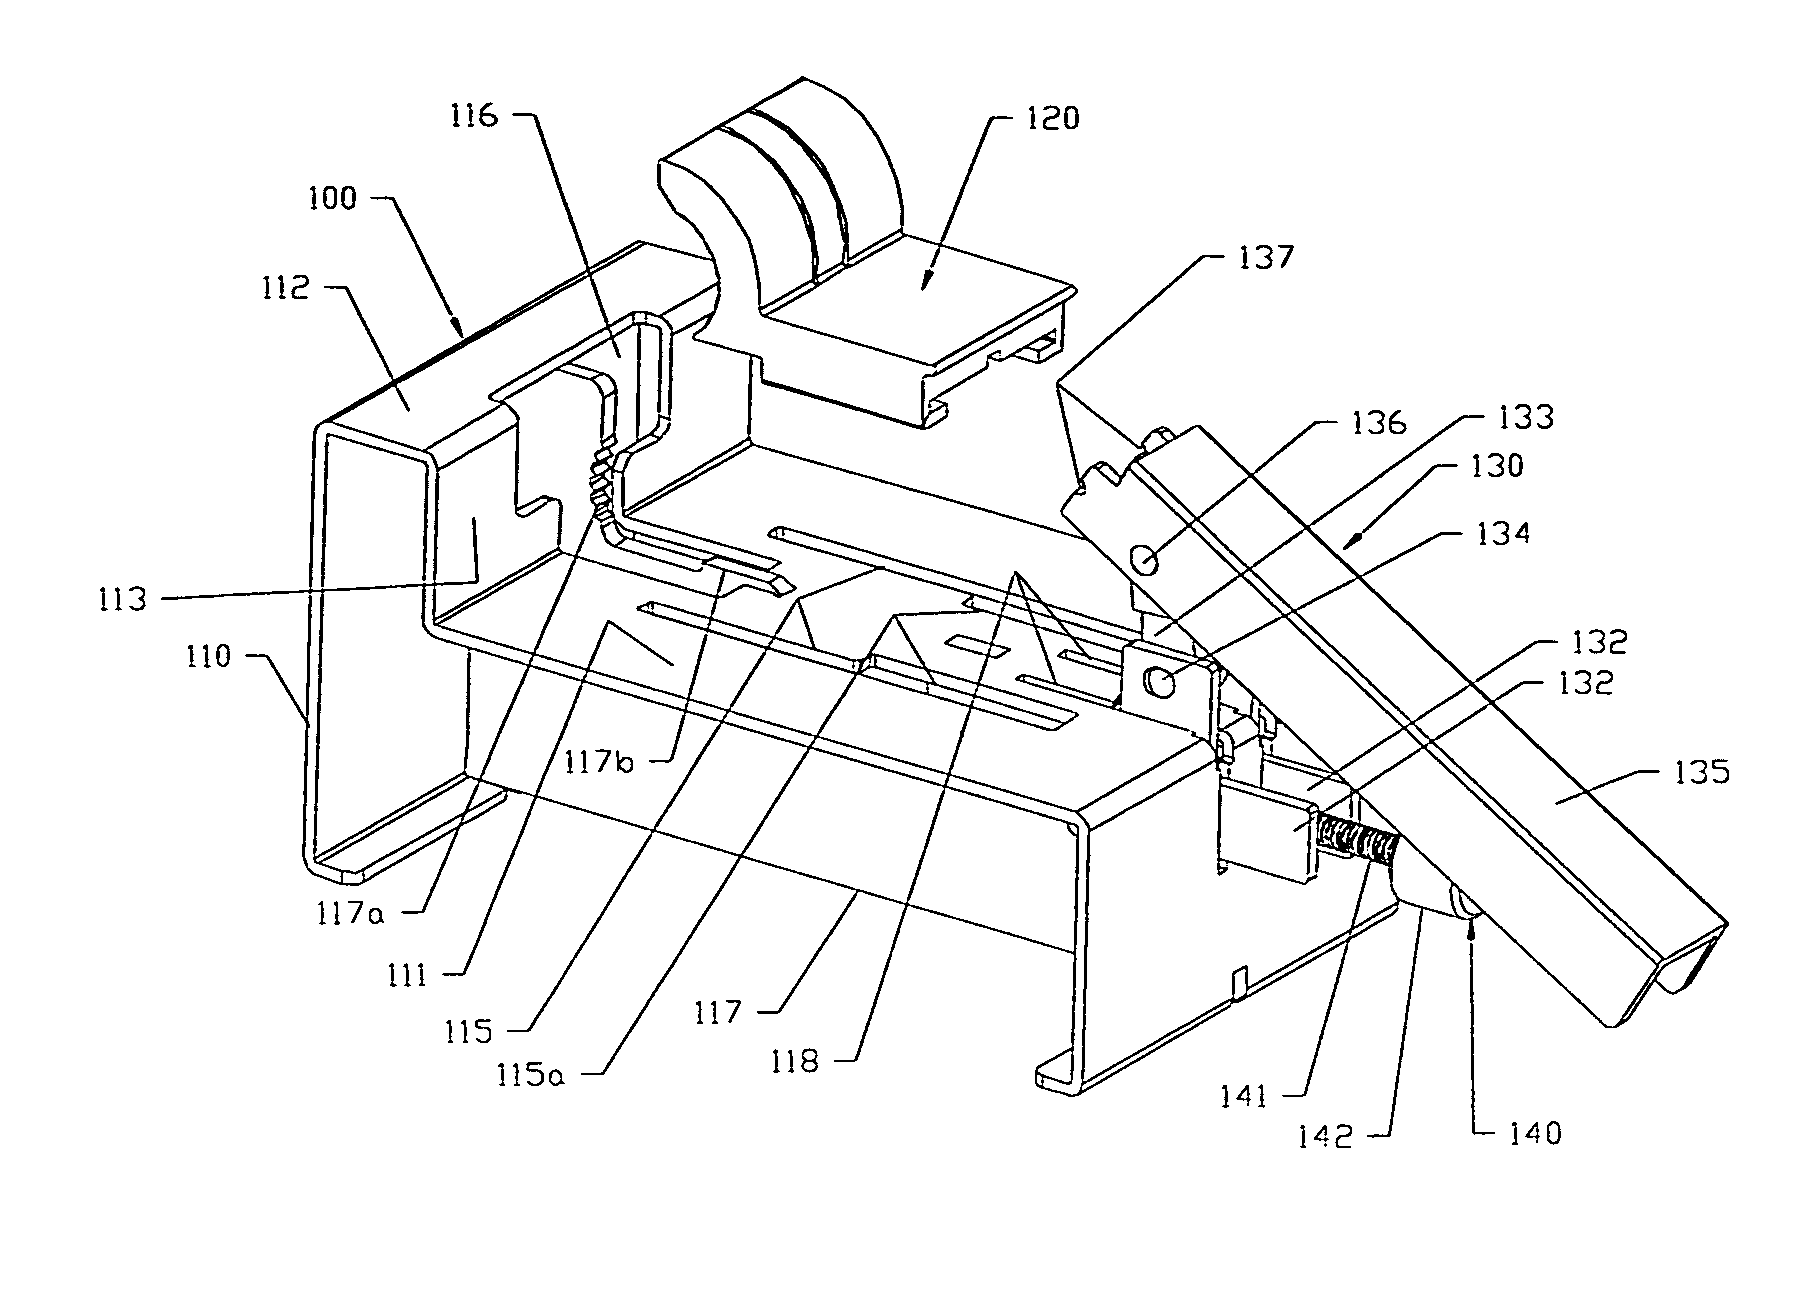 Method and apparatus for preparing bone grafts, including grafts for lumbar/thoracic interbody fusion